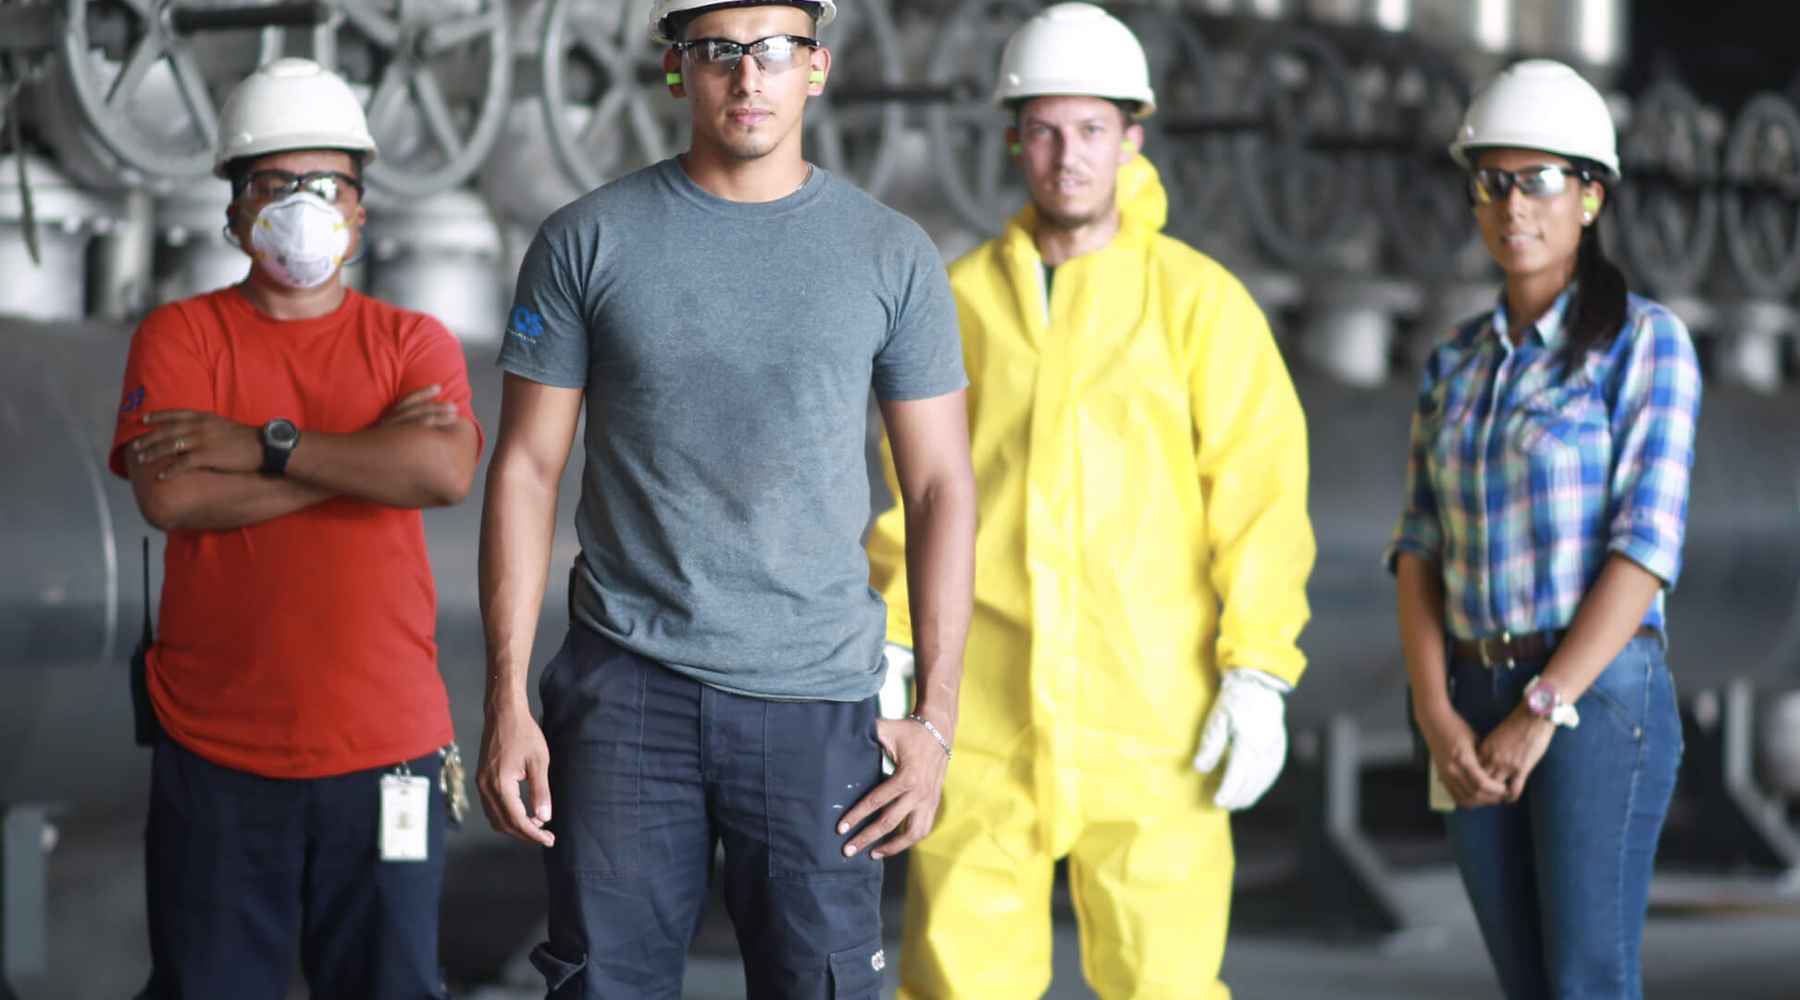 Four employees are wearing white hard hats and safety goggles, looking at the camera.